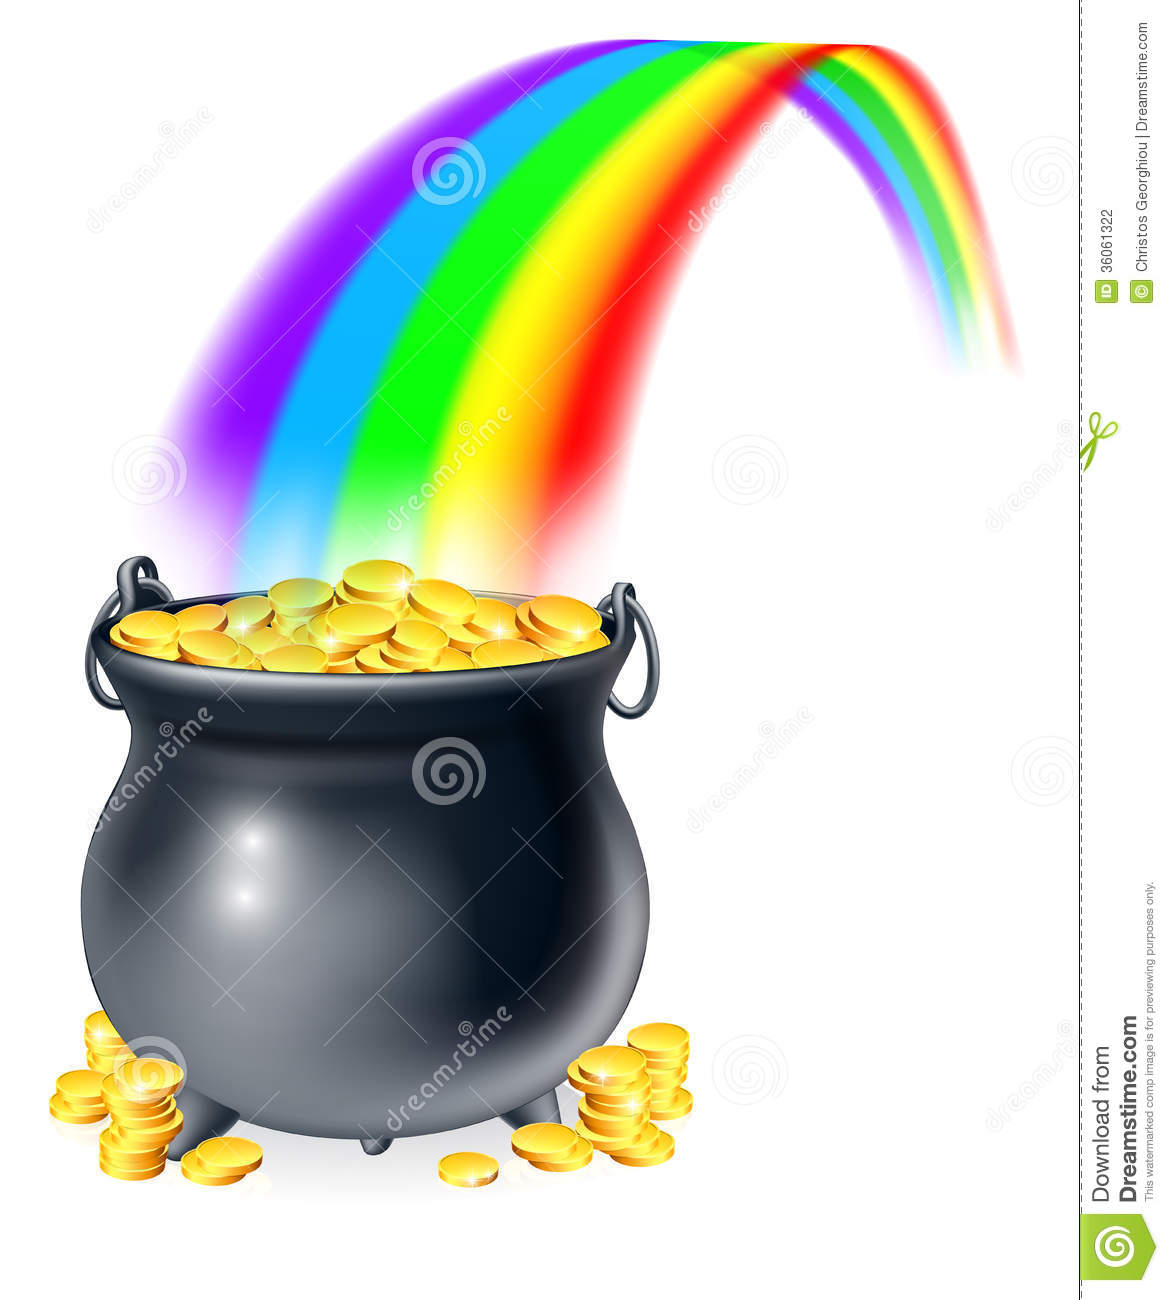     Pot Of Gold Clipart Black And White   Clipart Panda   Free Clipart